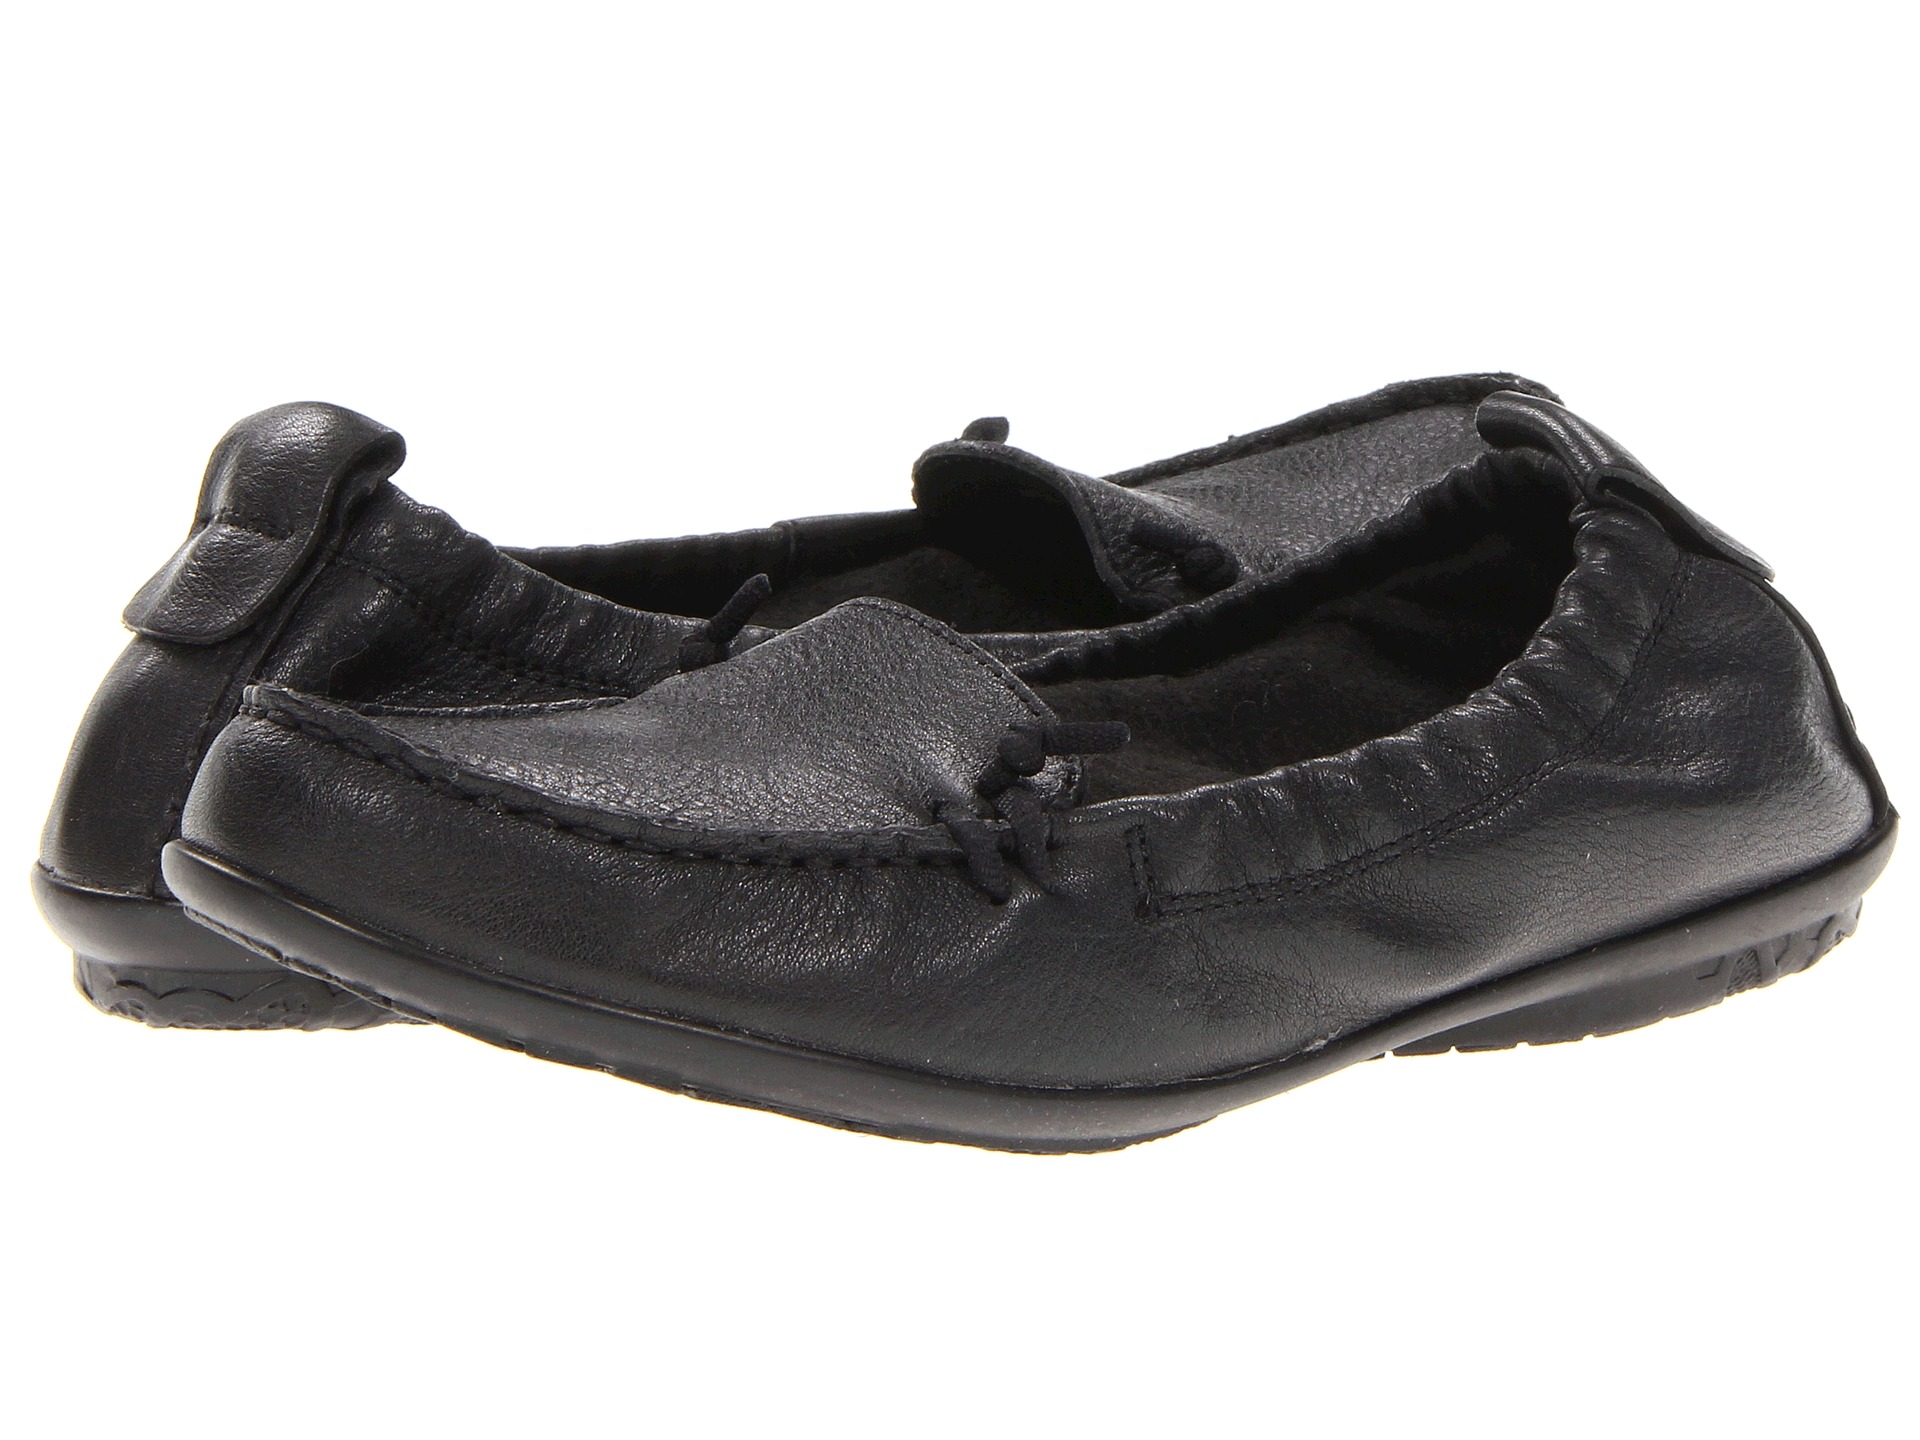 Hush Puppies Ceil Slip On, Shoes | Shipped Free at Zappos